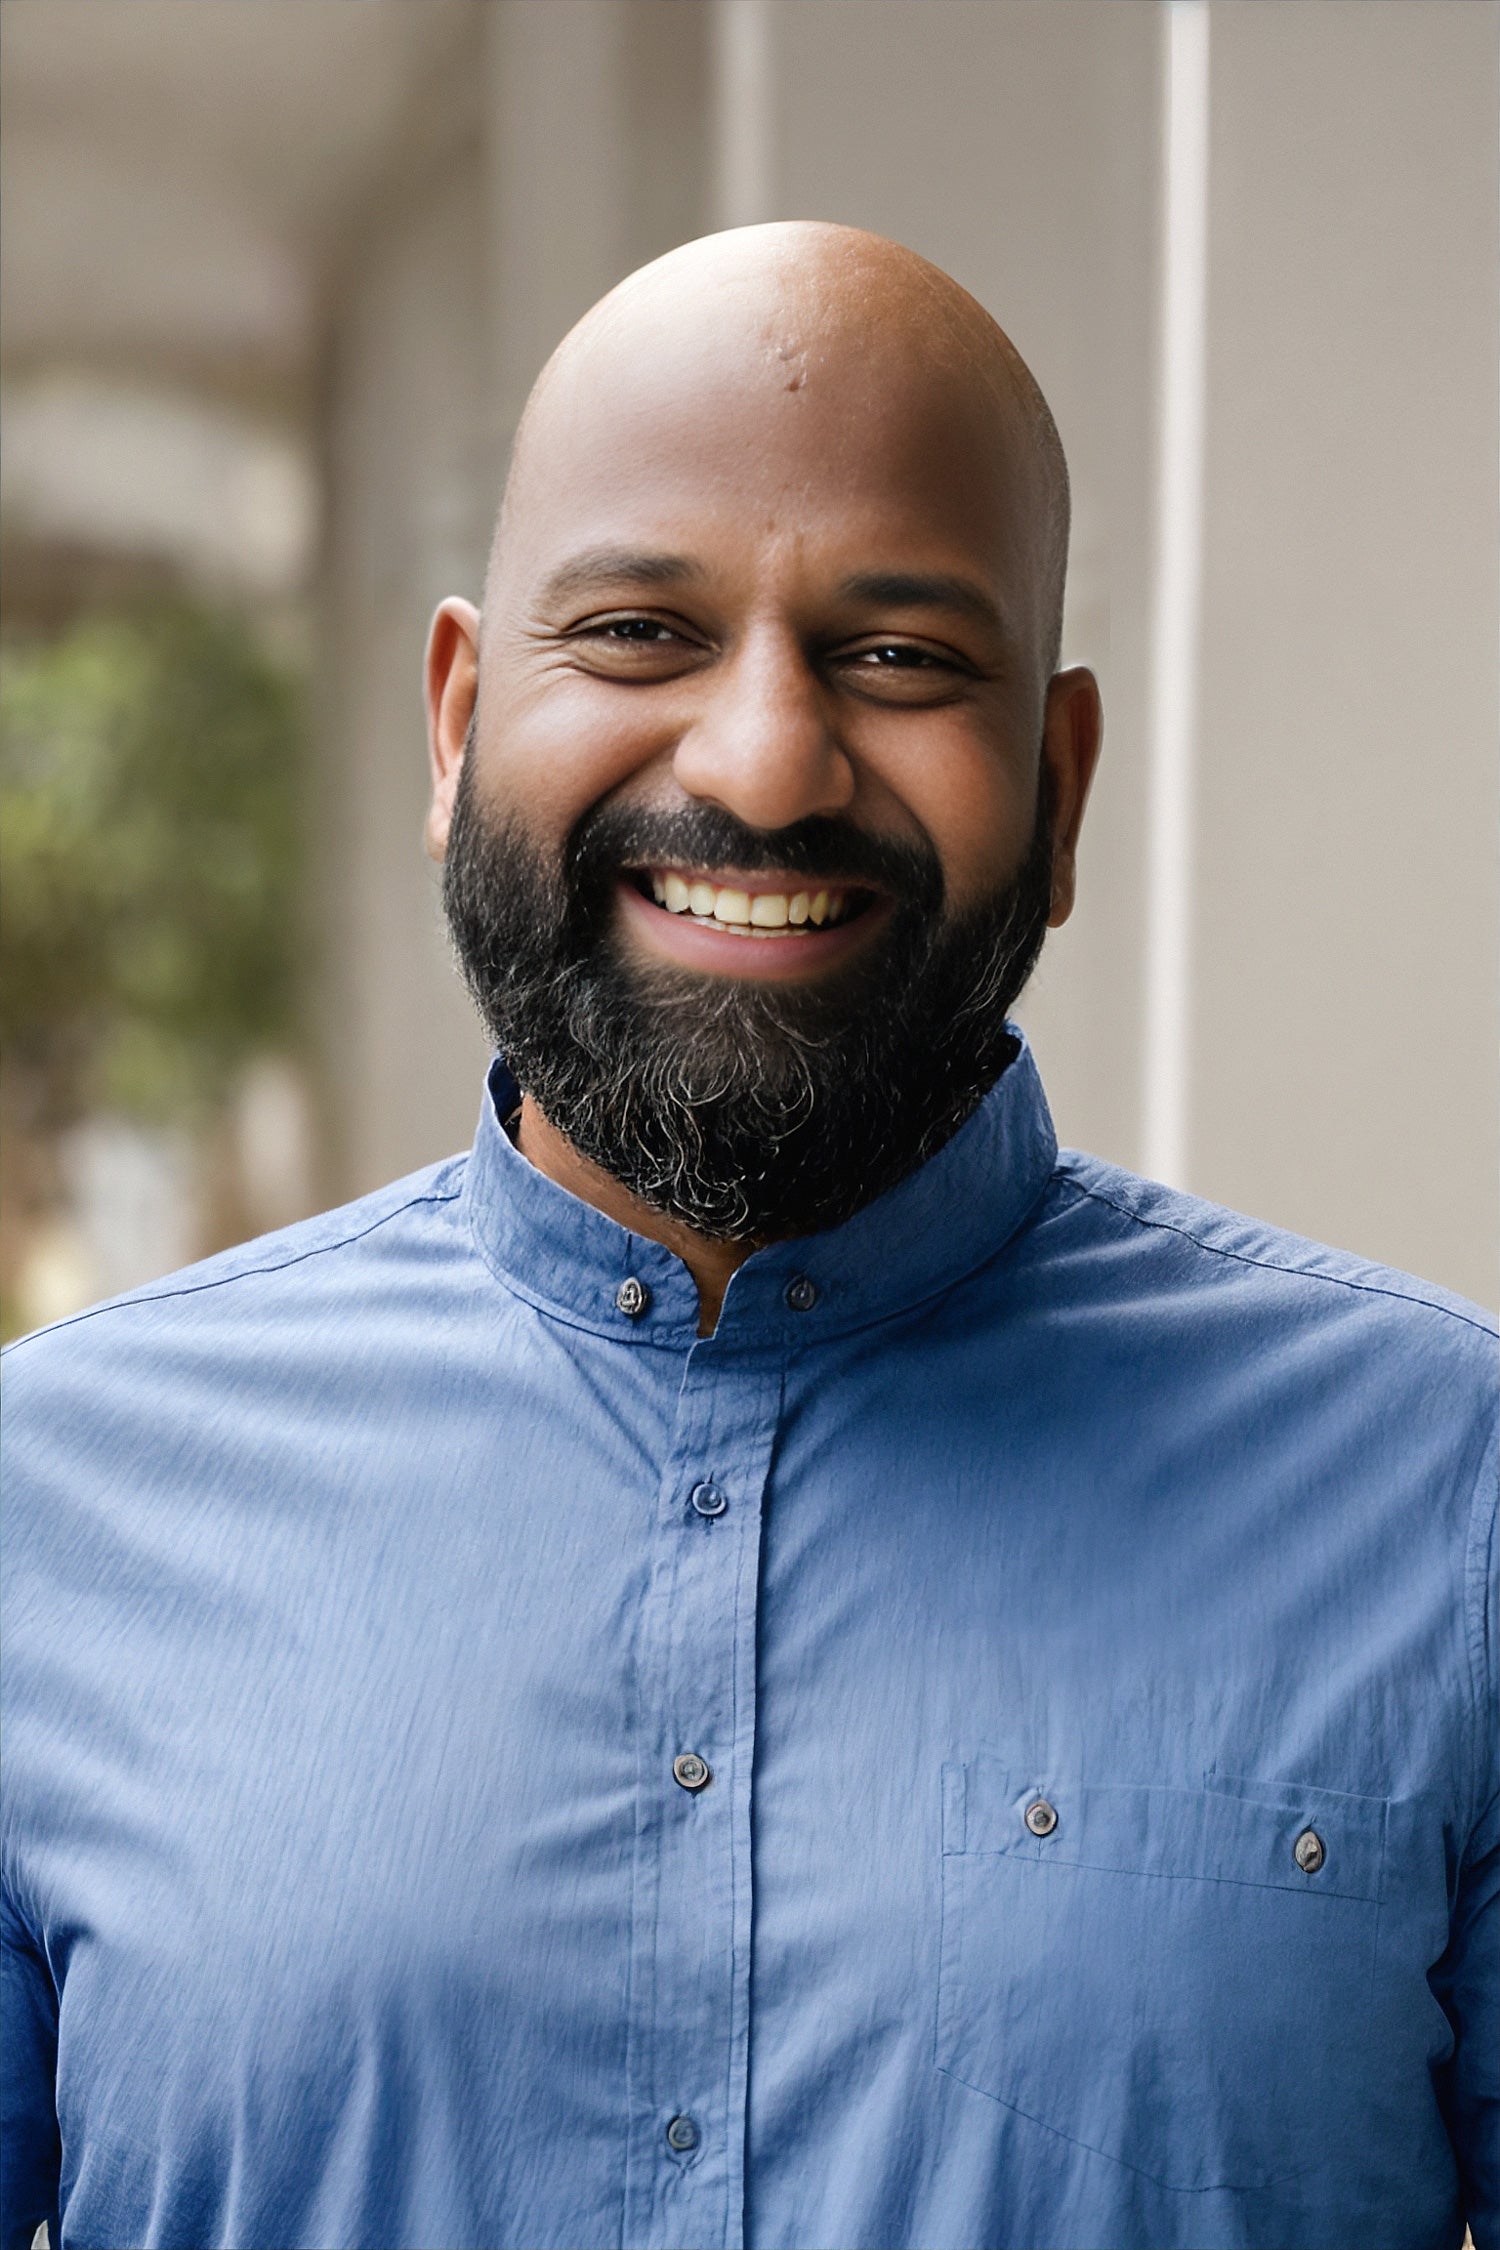 A man with a beard and mustache stands in a blue button up shirt smiling at the camera